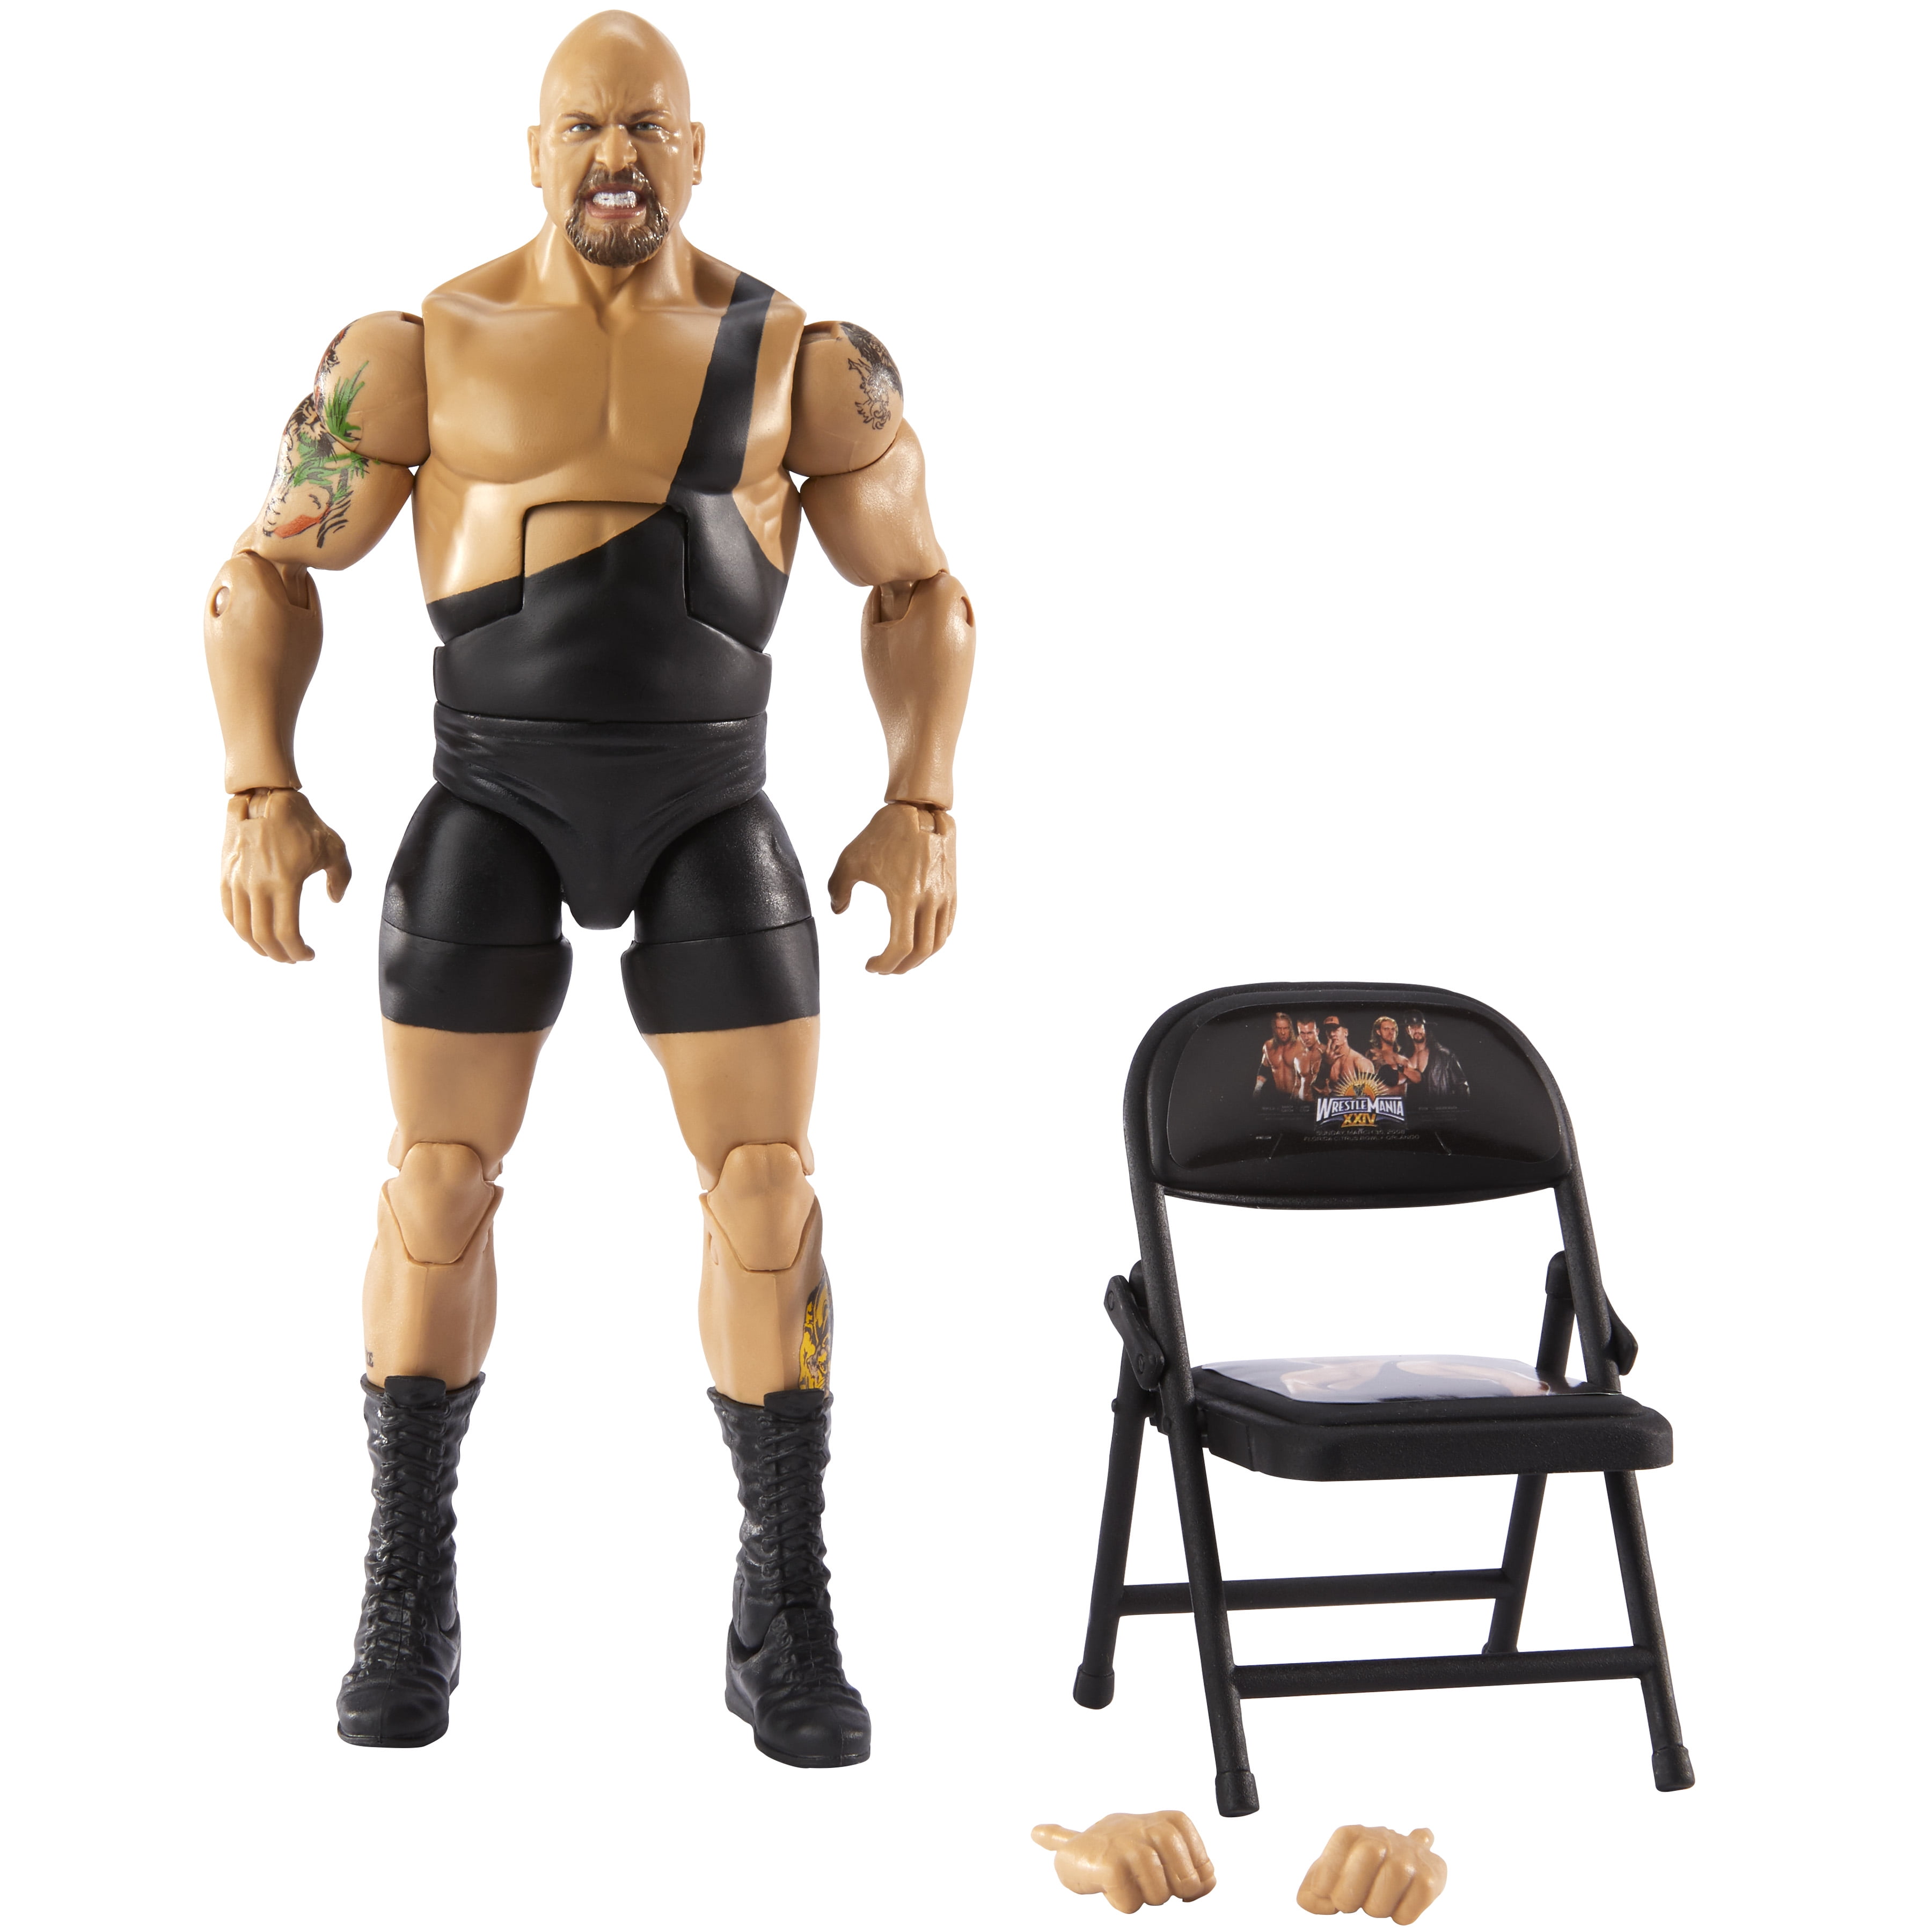 WWE Decade Of Domination Kane & Big Show Walmart Exclusive Action Figures New 